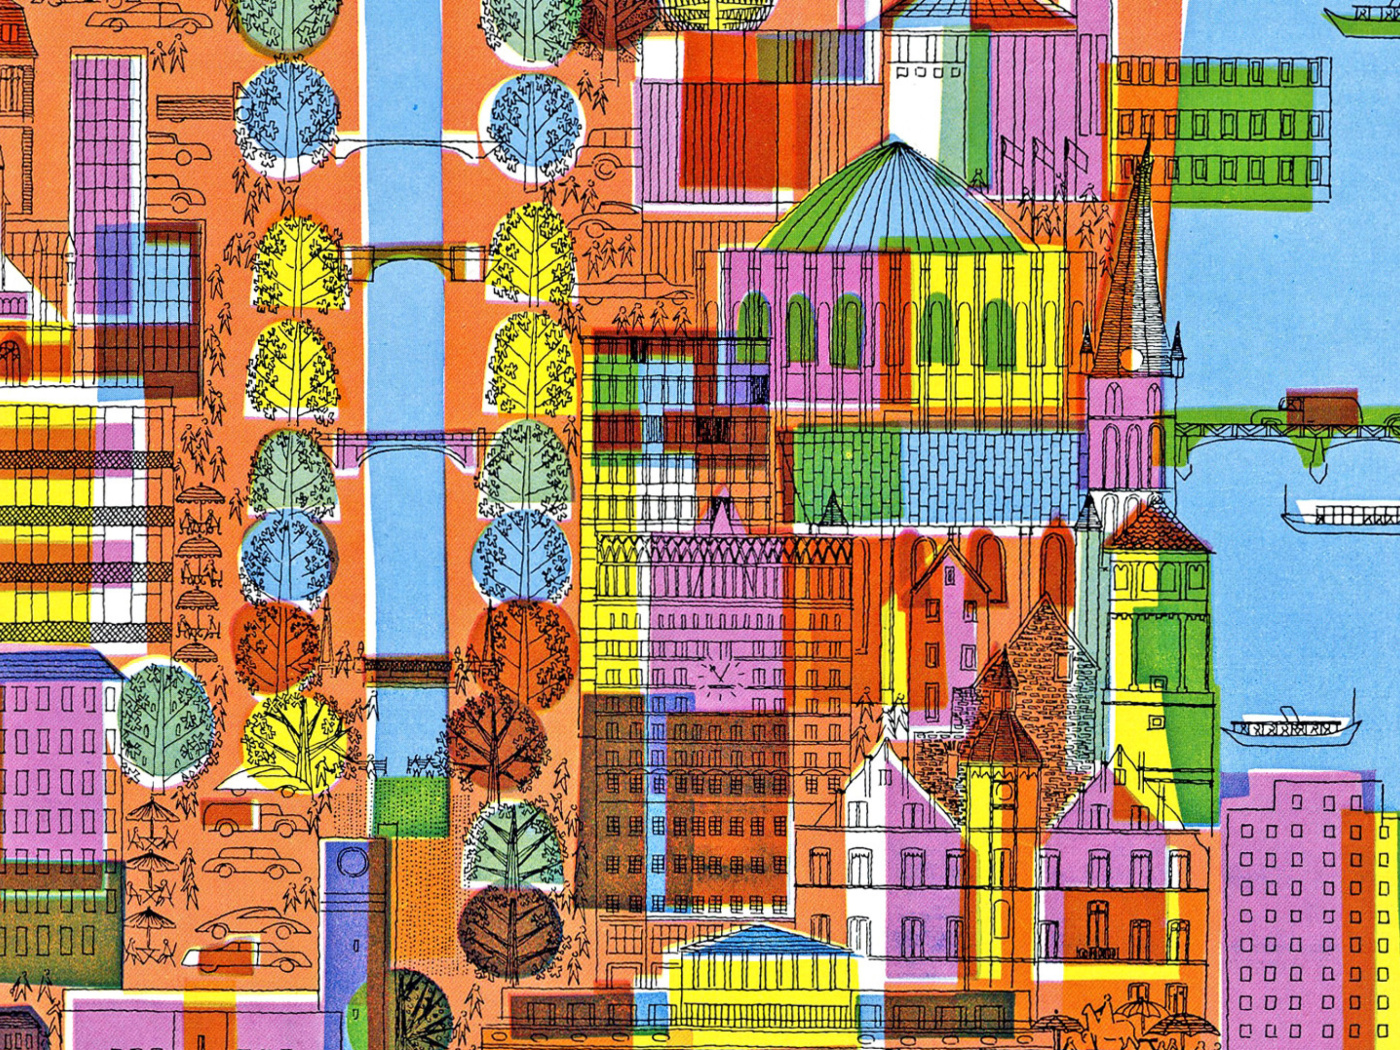 Town Illustration and Clipart screenshot #1 1400x1050